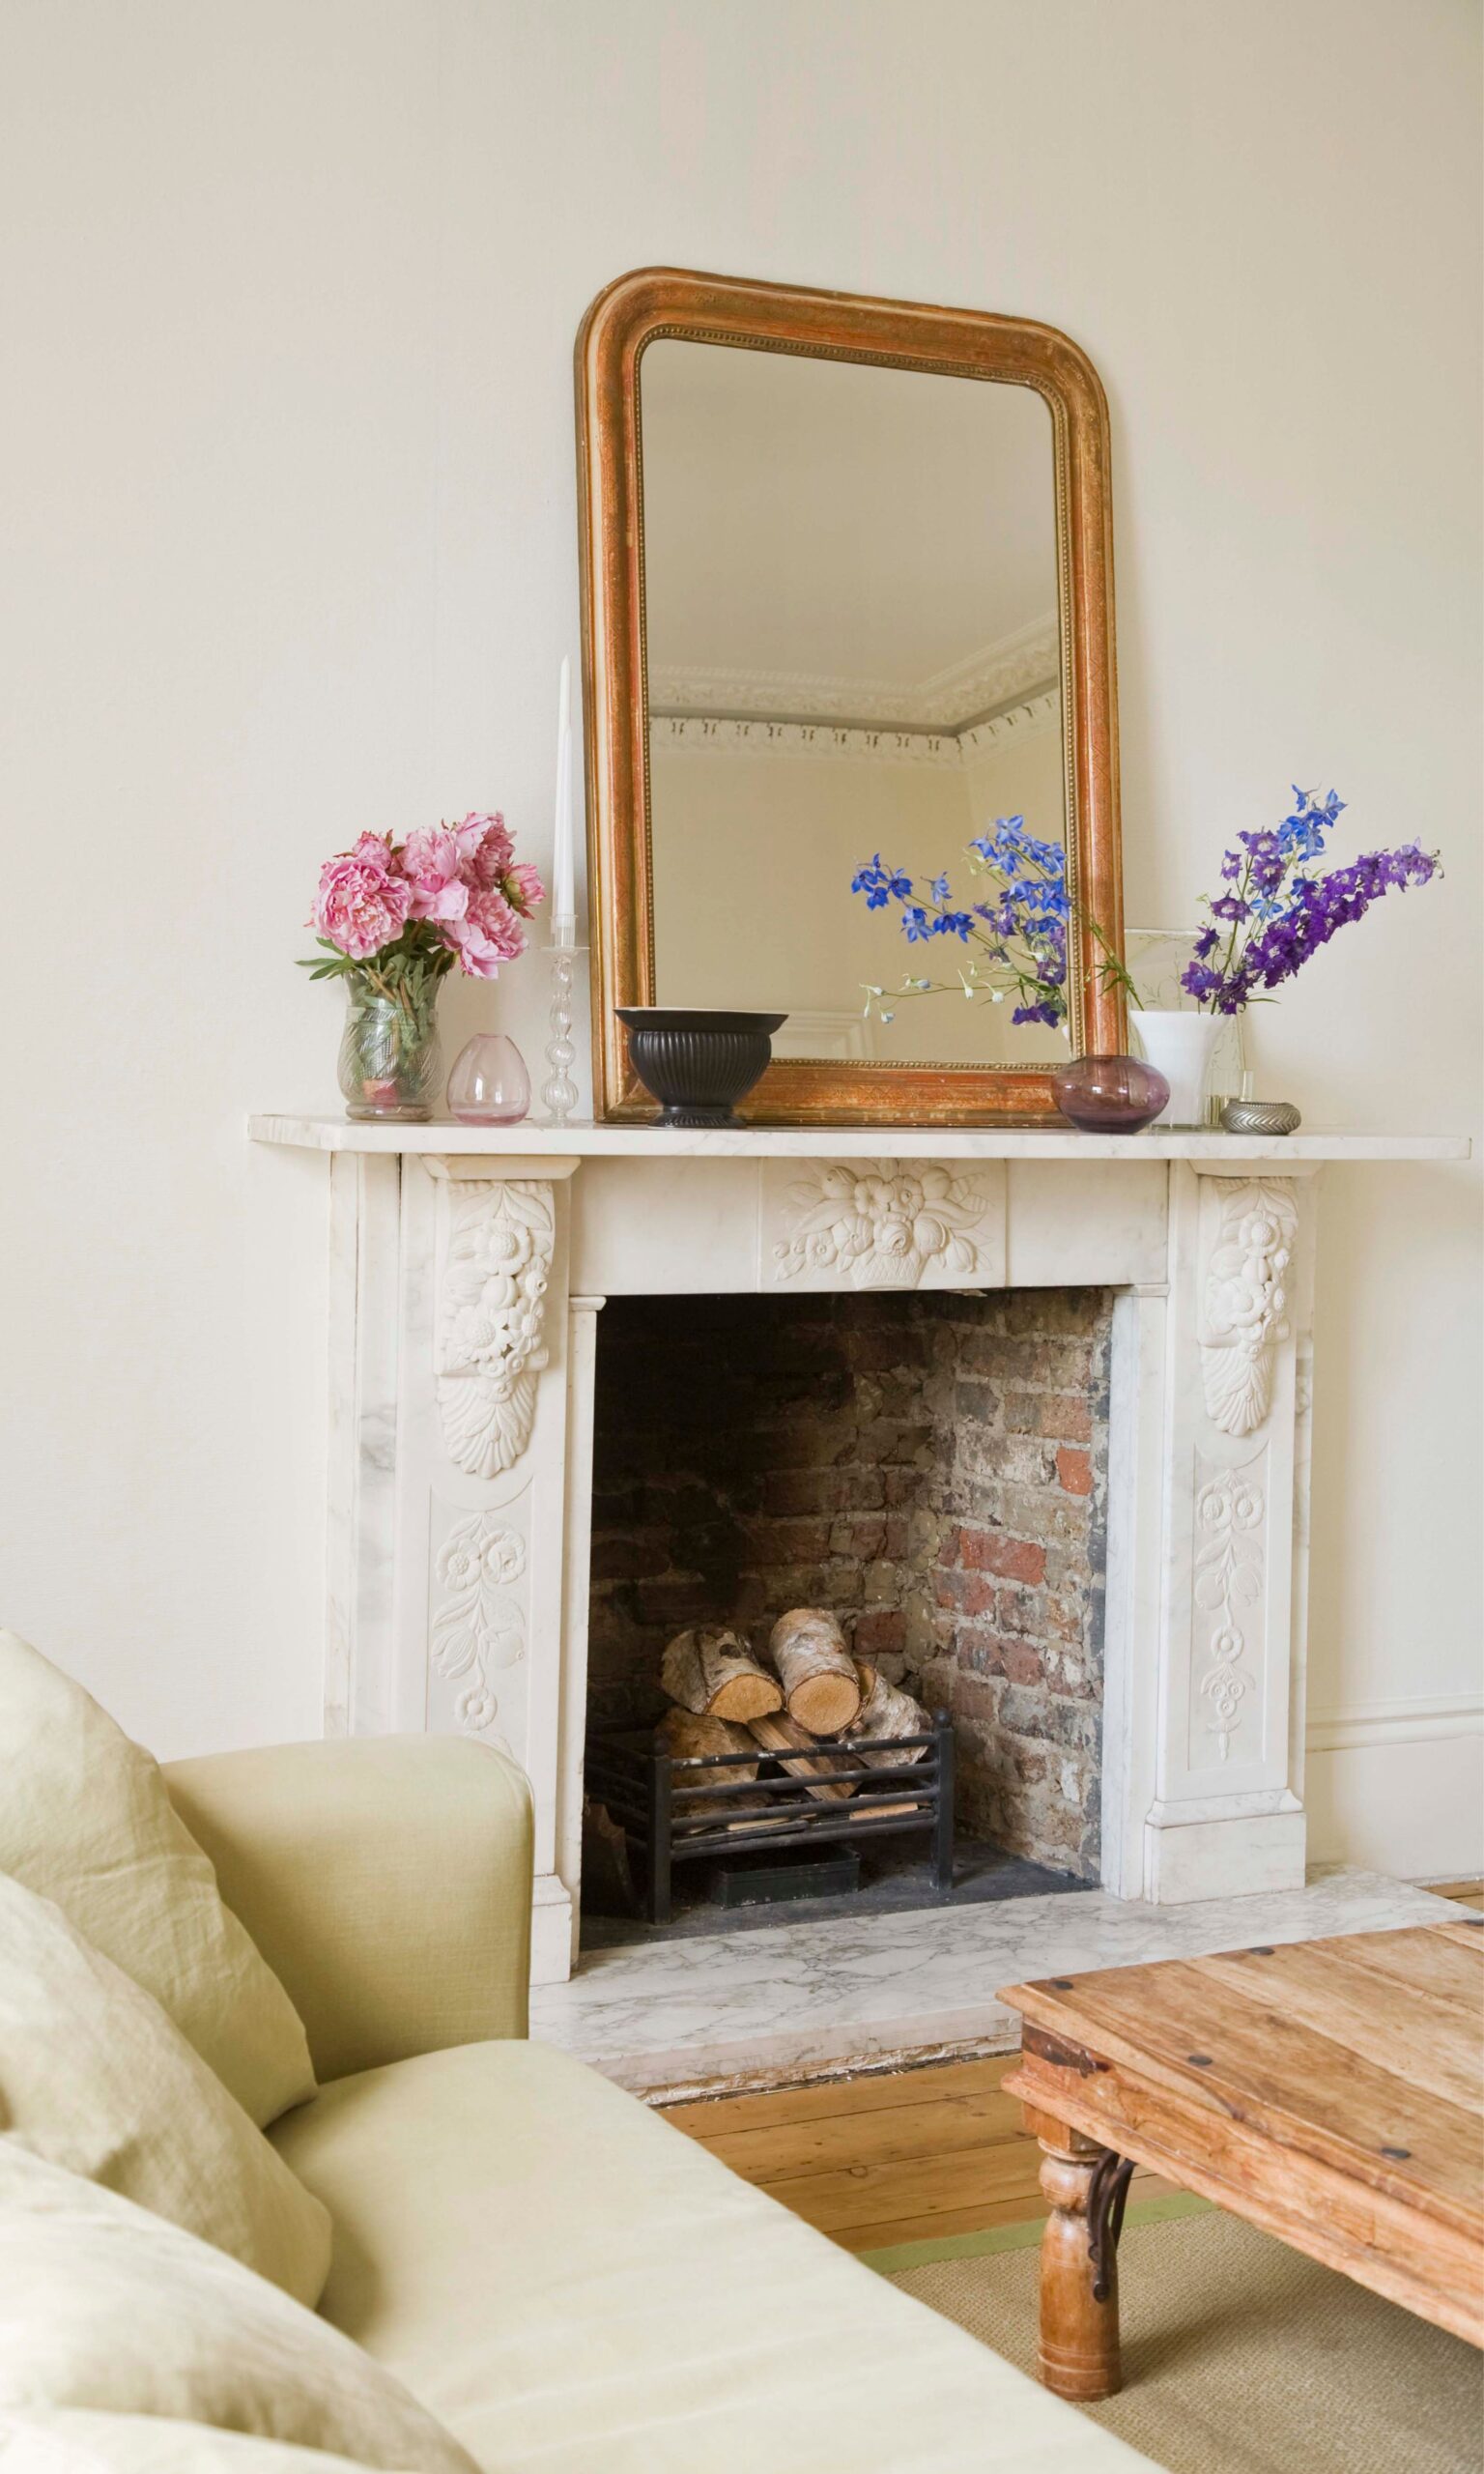 Decorating a fireplace wall with various elements